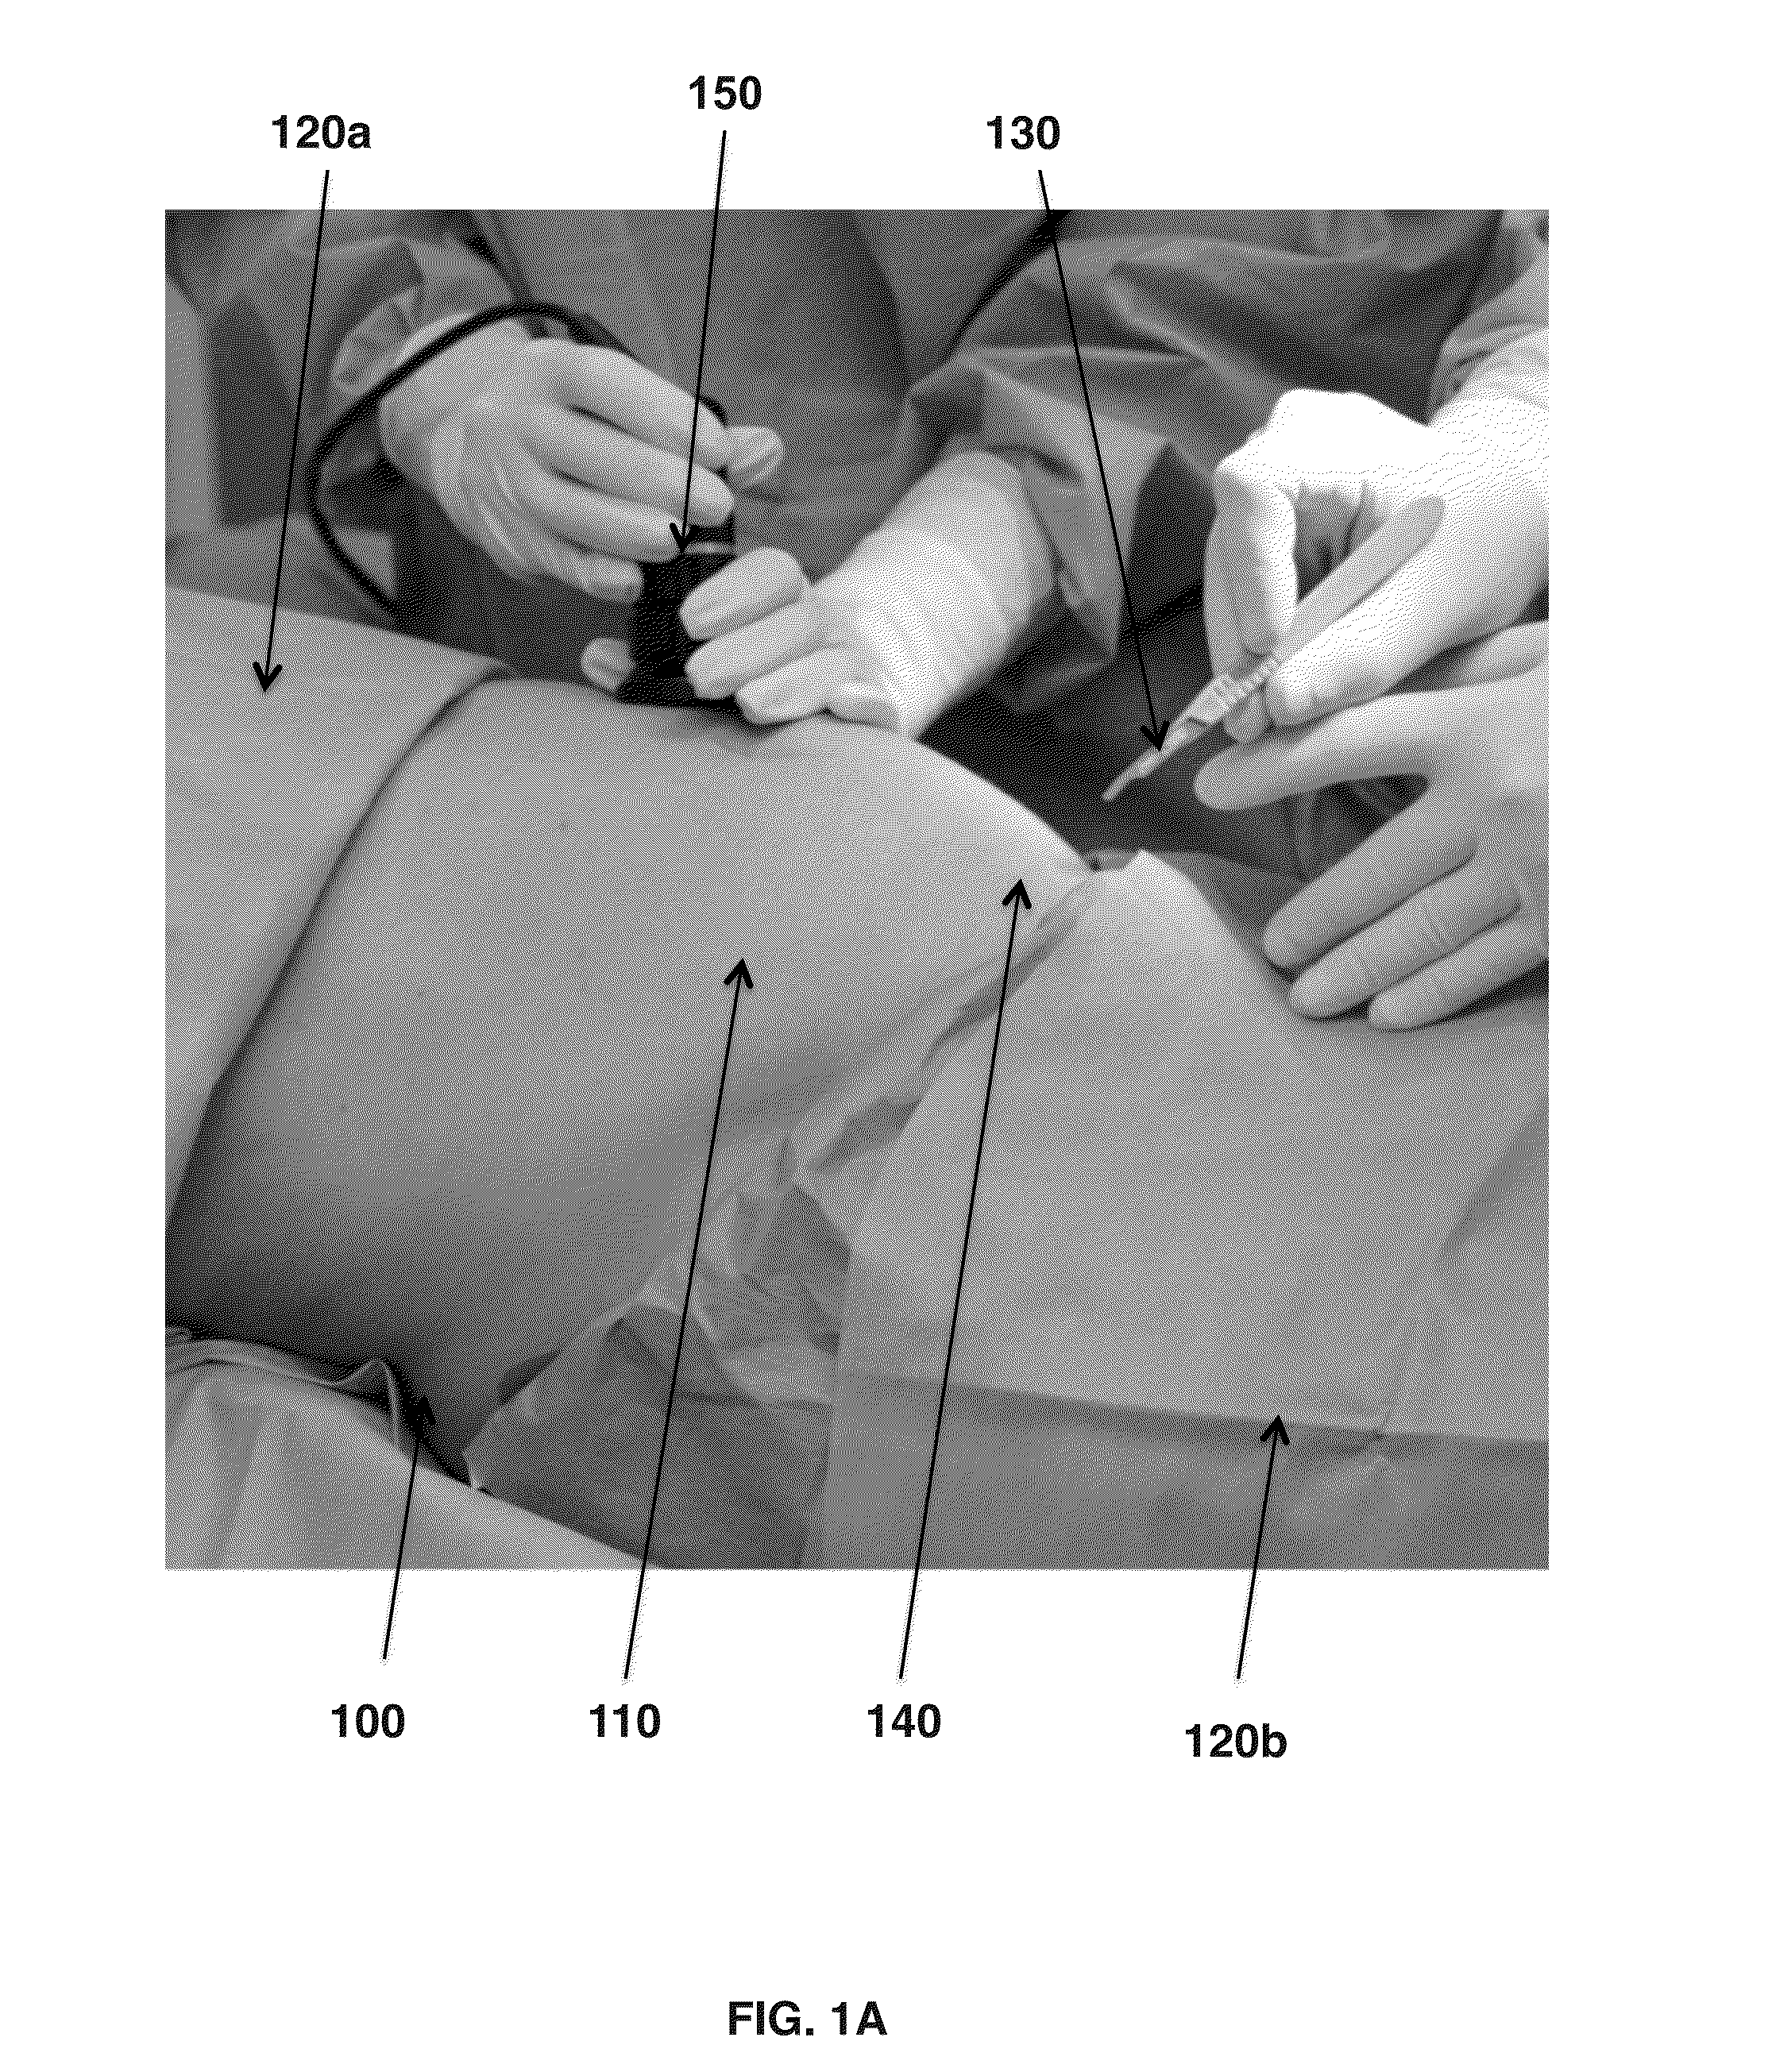 Method for Obtaining Sterile Human Amniotic Fluid and Uses Thereof